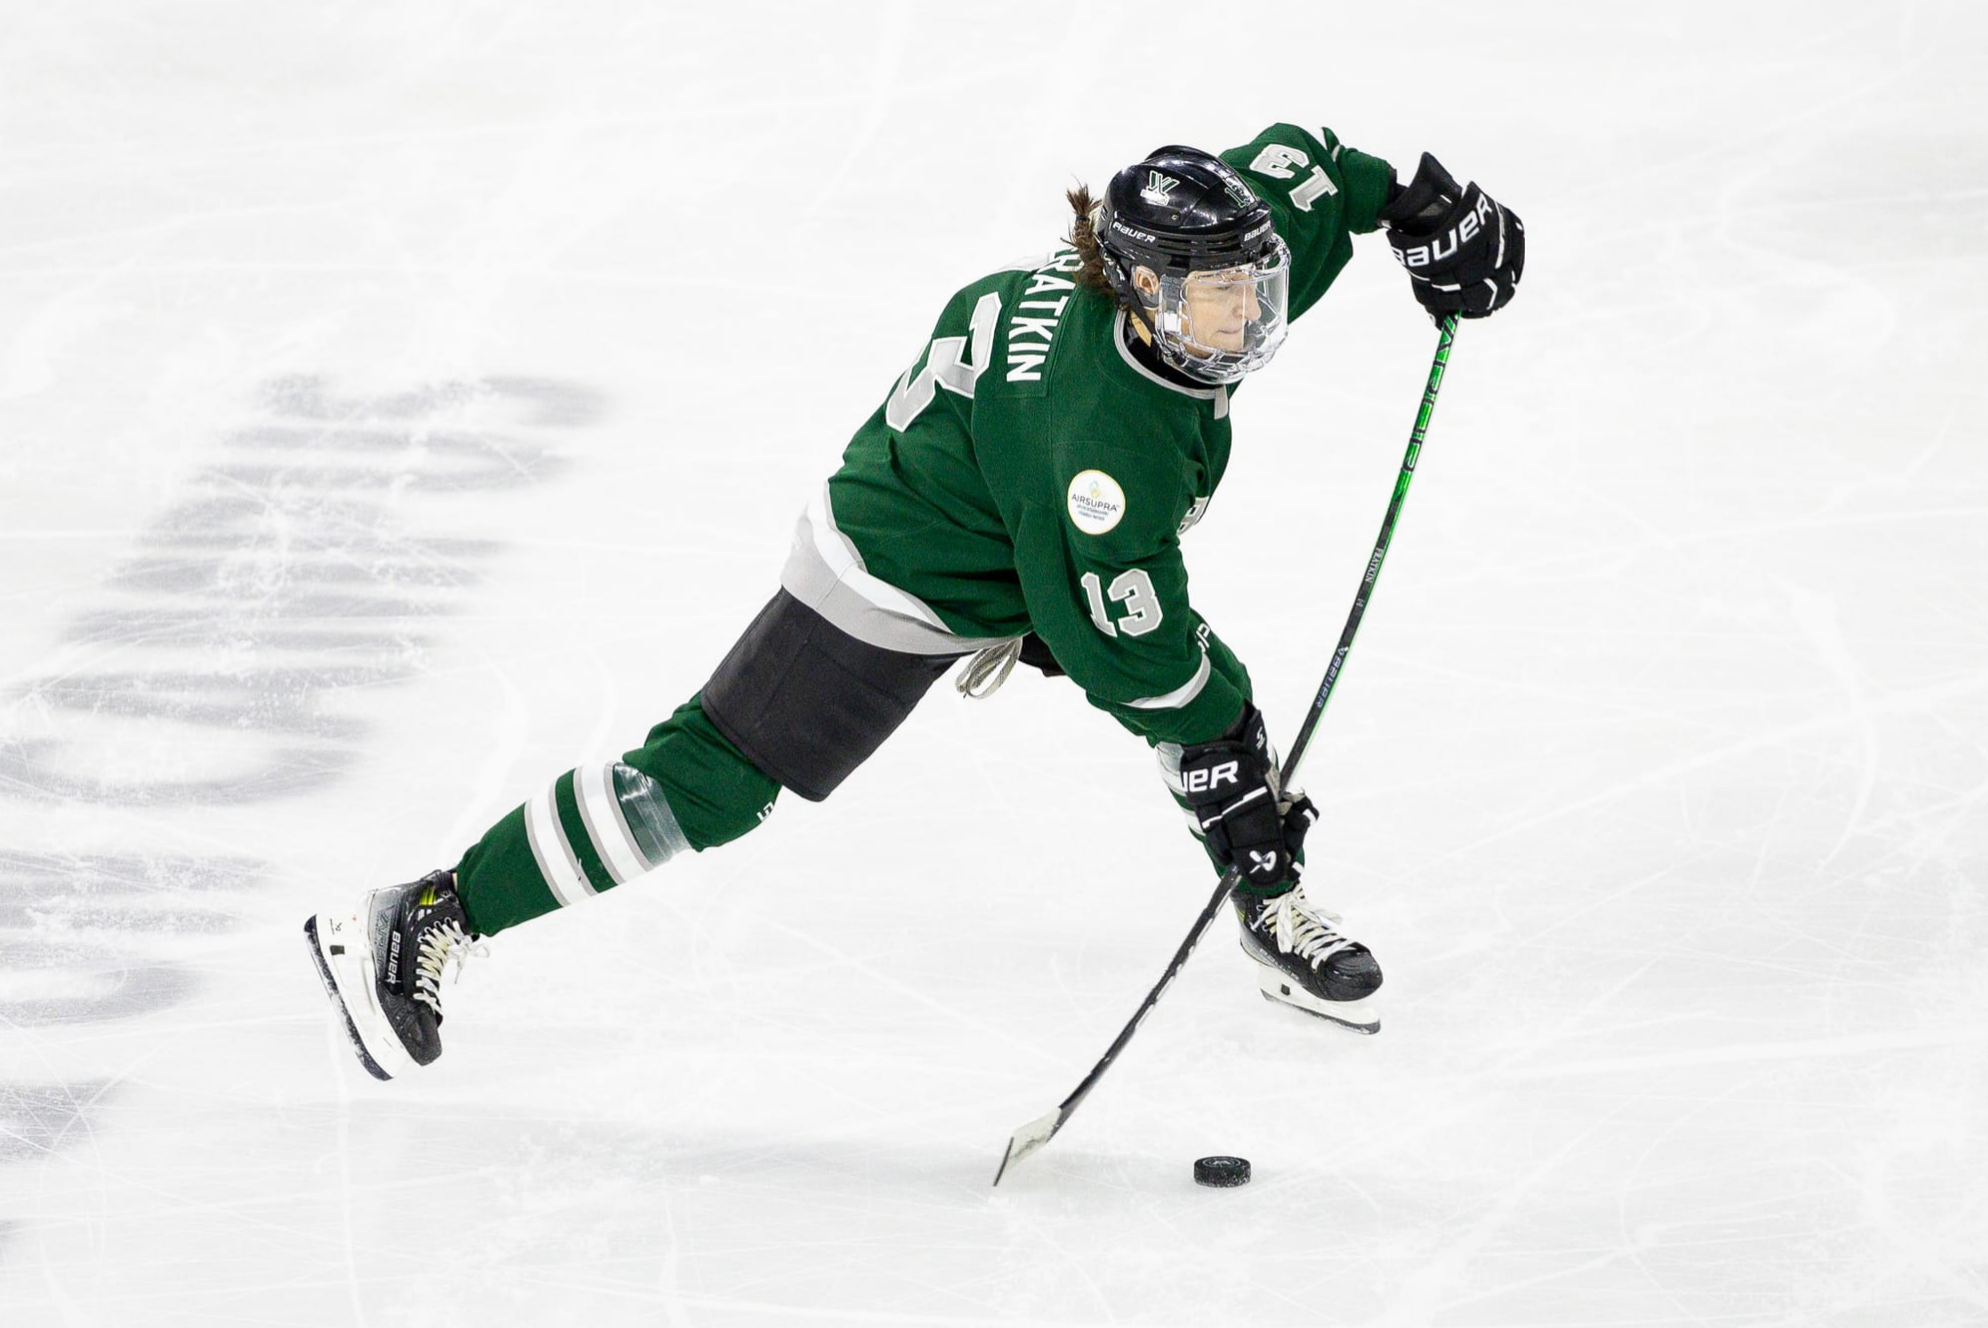 Kaleigh Fratkin moments before taking a slap shot against New York. Her weight is on her left leg, which is out front, while her stick is flexed as it's about to hit the ice before following through on the puck. She is wearing a green home uniform.